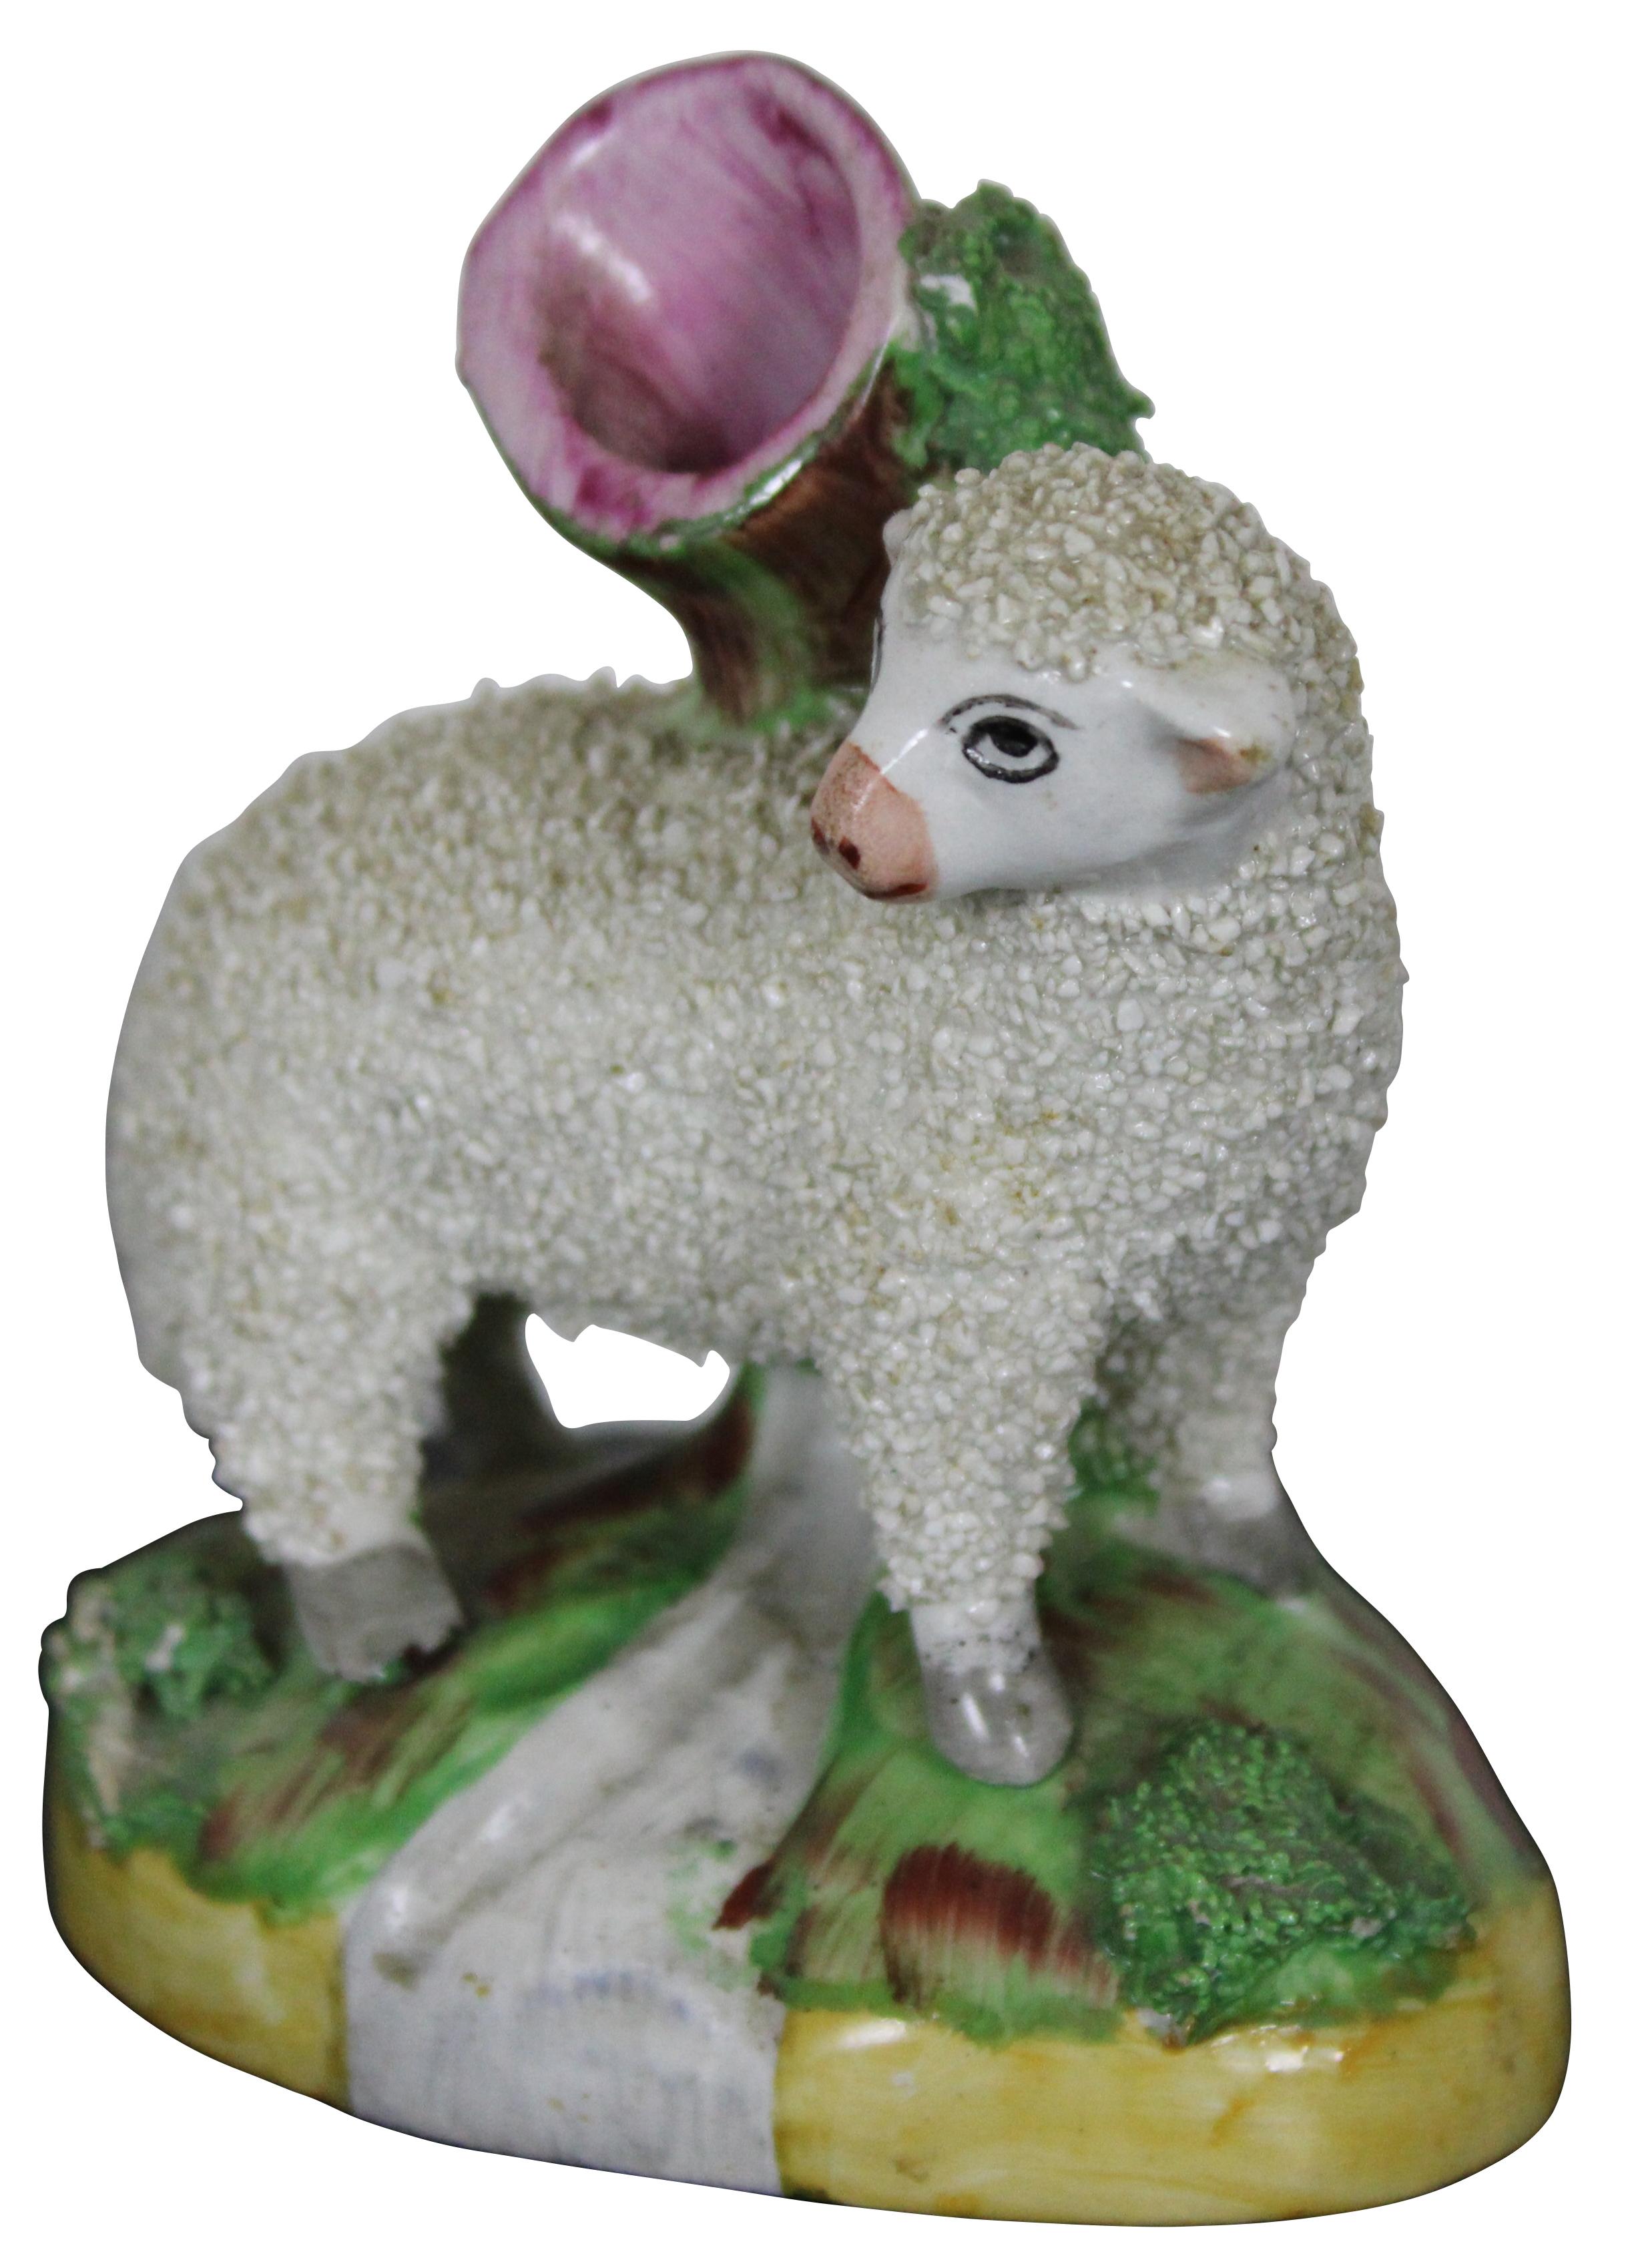 Small antique Victorian Staffordshireware spill or bud vase featuring a confetti porcelain lamb or sheep.